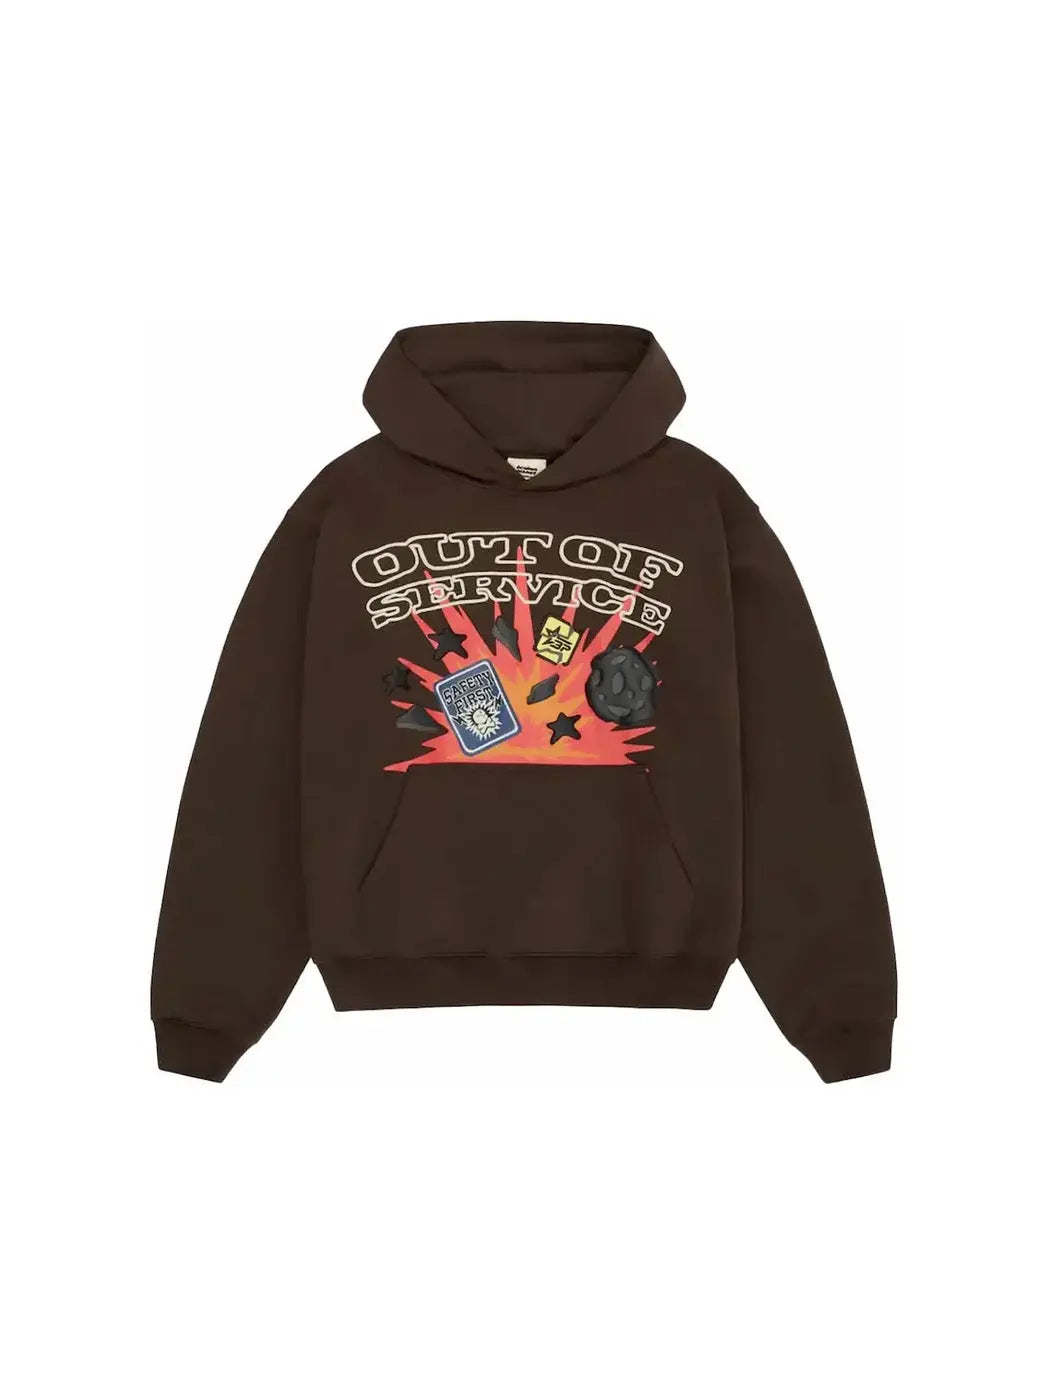 Broken Planet Out Of Service Hoodie Brown in Auckland, New Zealand - Shop name